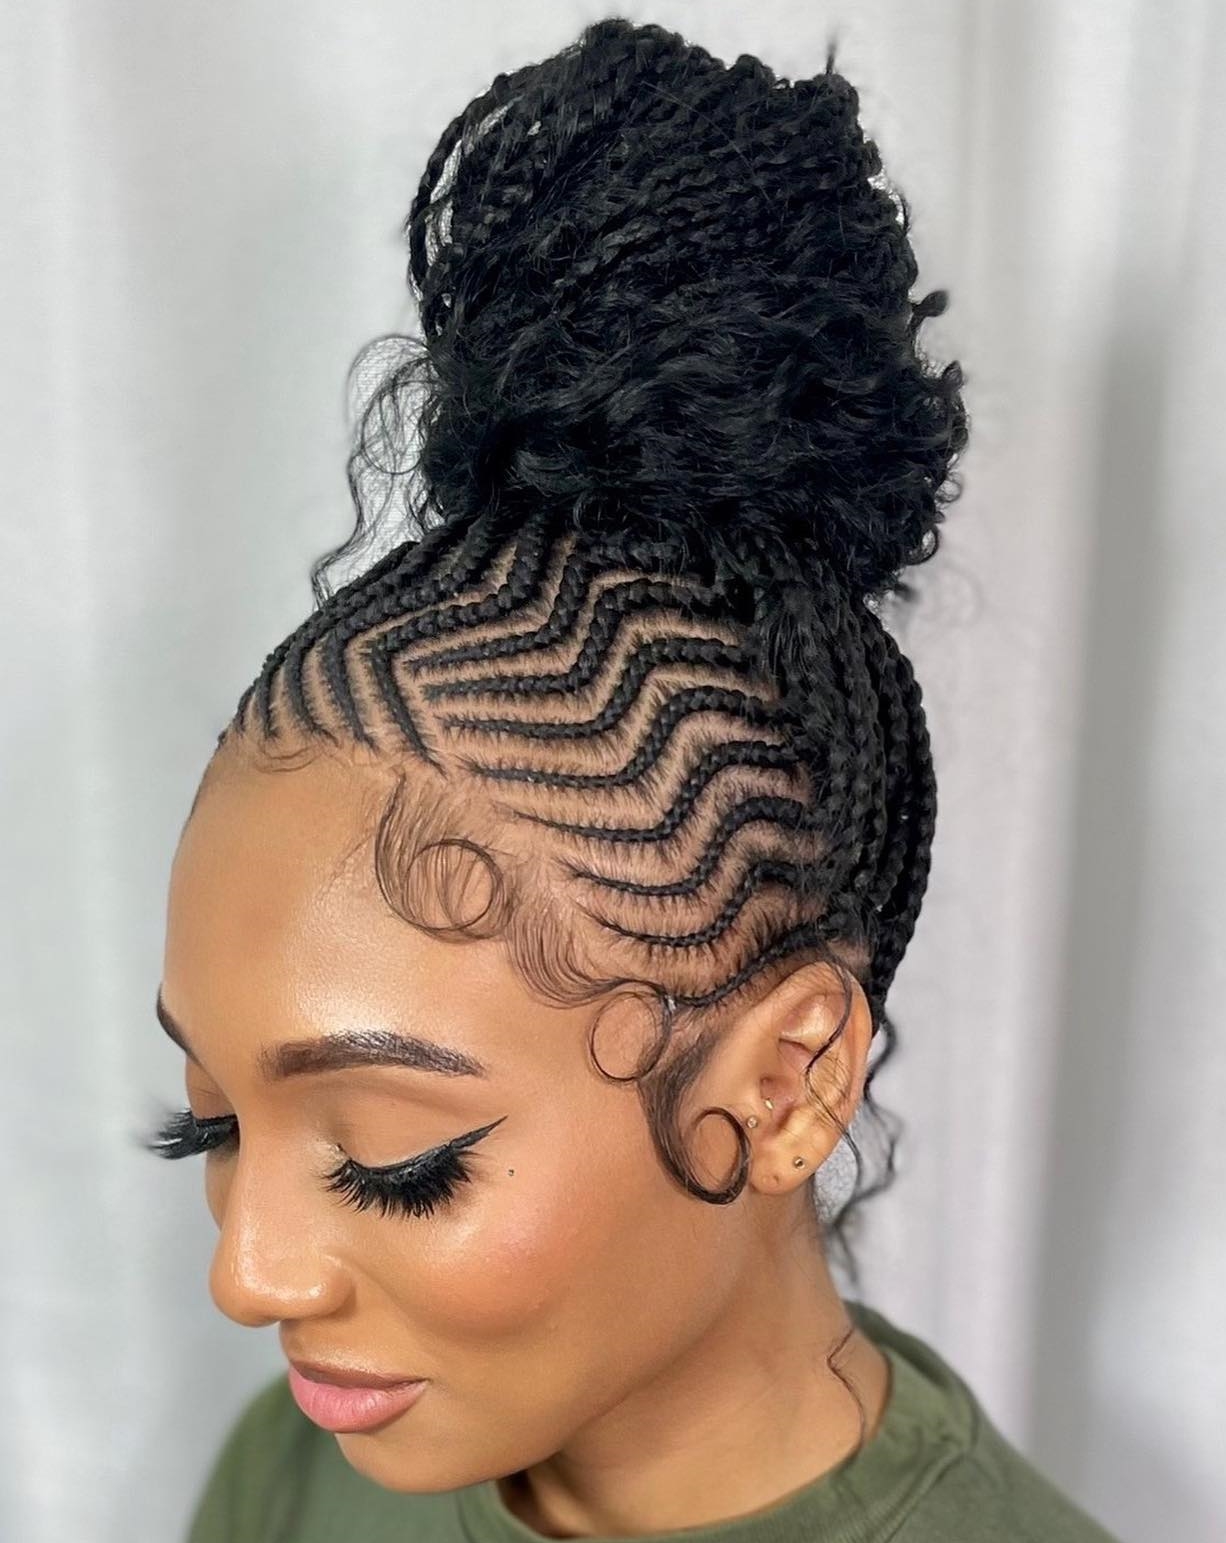 2 stitch braids with curly ends CbaKh8WLk6J